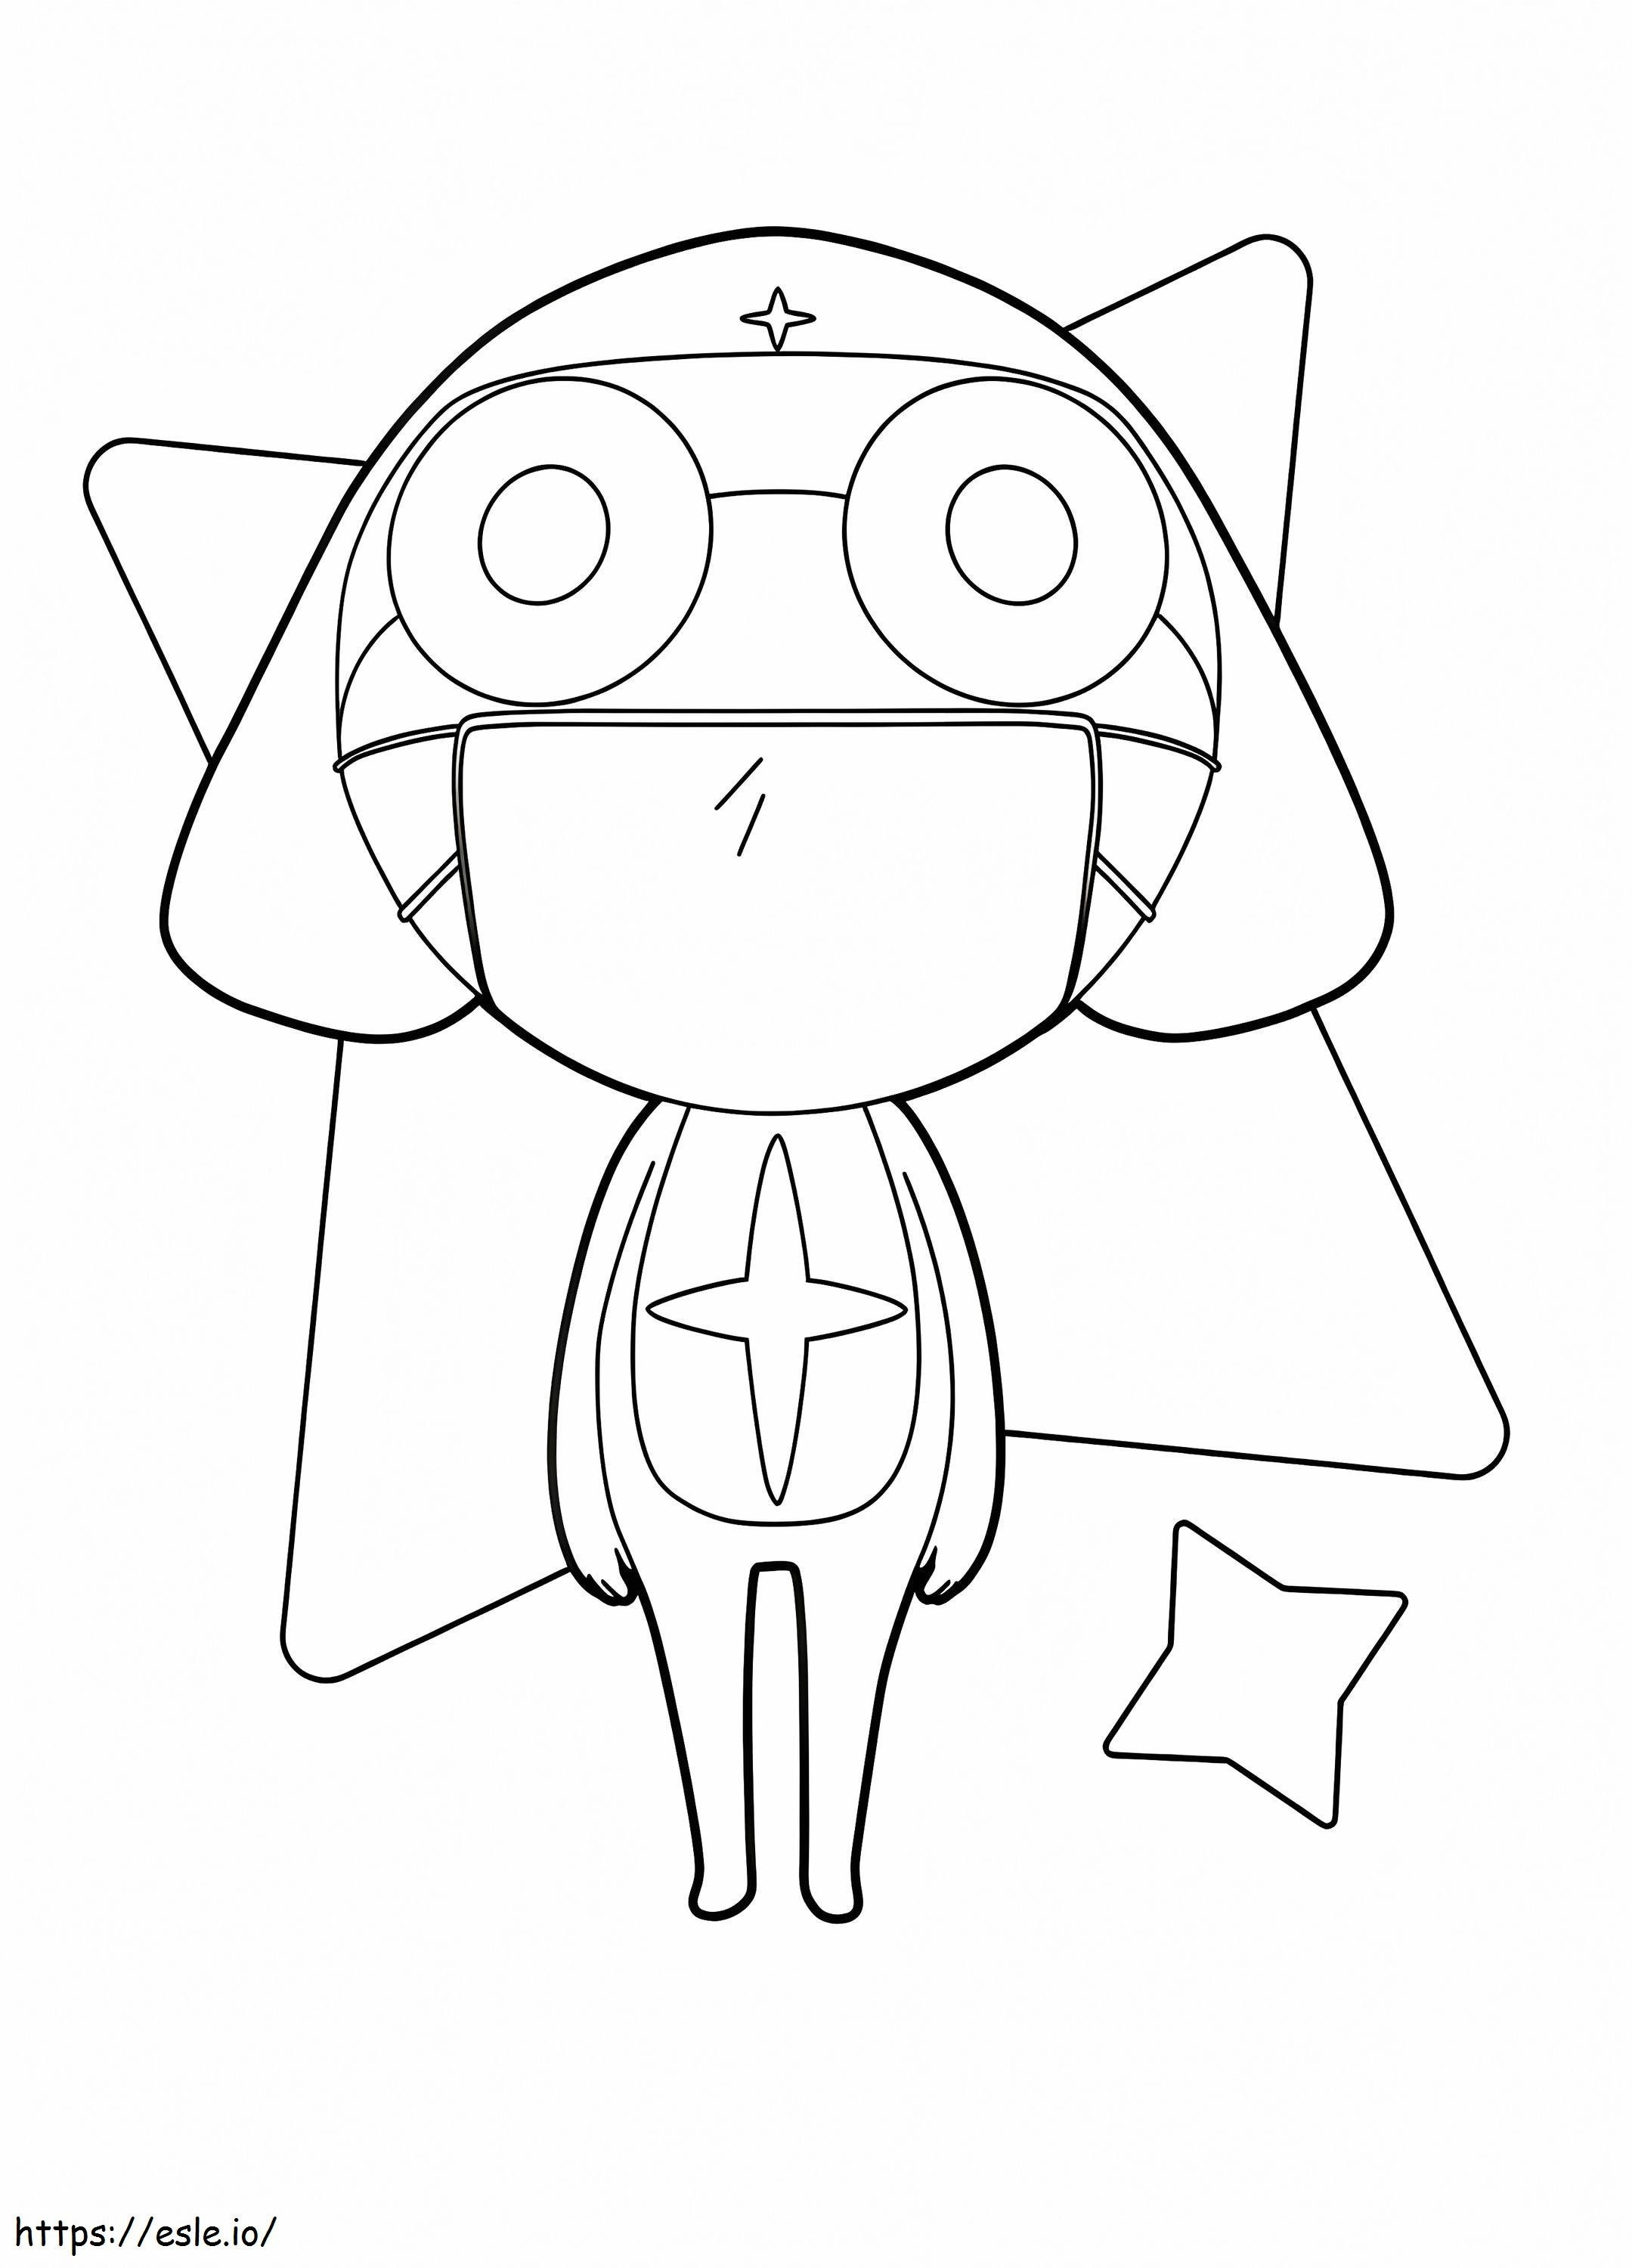 Dororo From Keroro Gunso coloring page